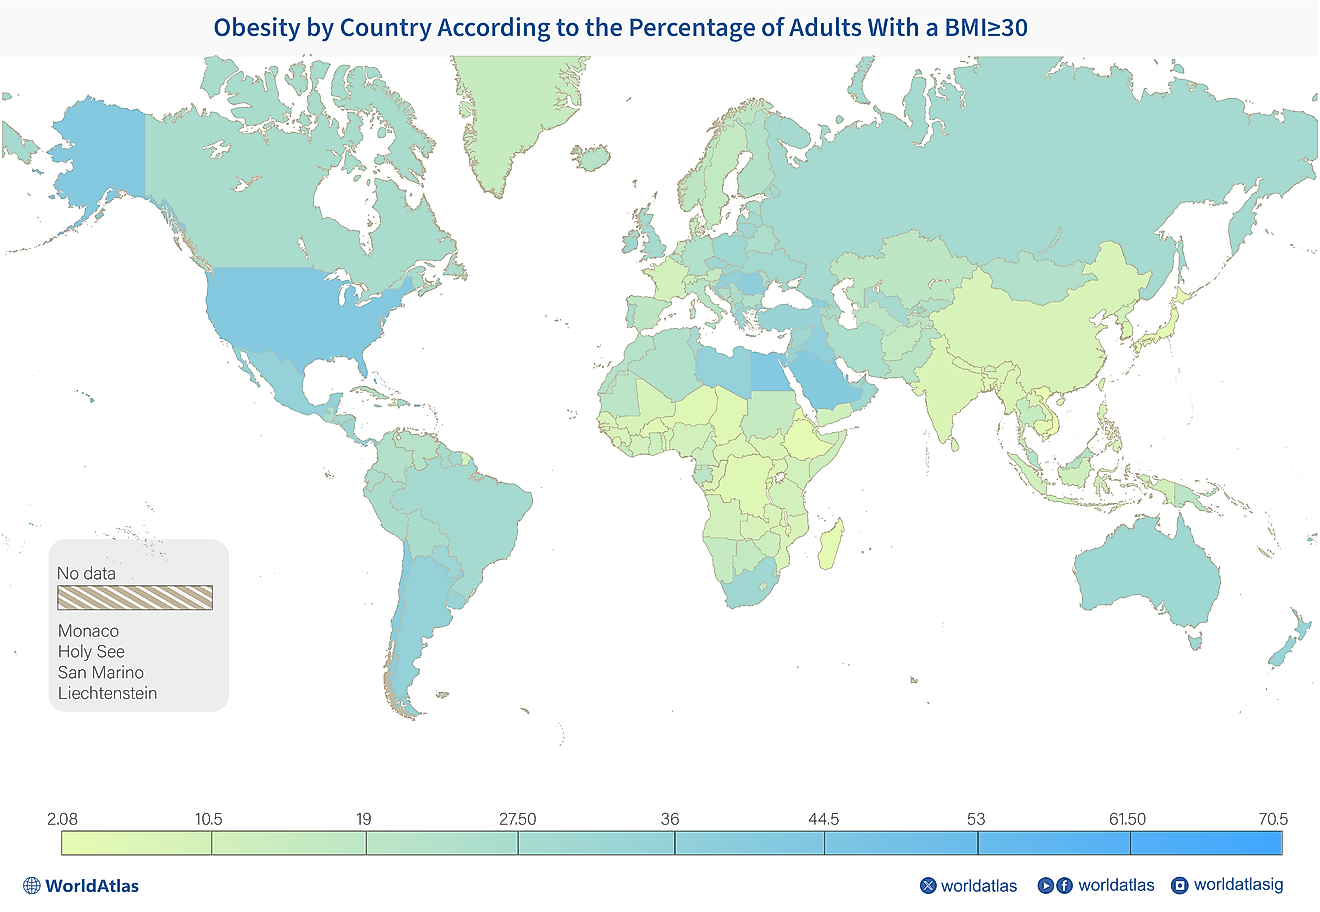 color coded heat map showing obesity by country worldwide according to the percentage of adults with a BMI greater than or equal to 30